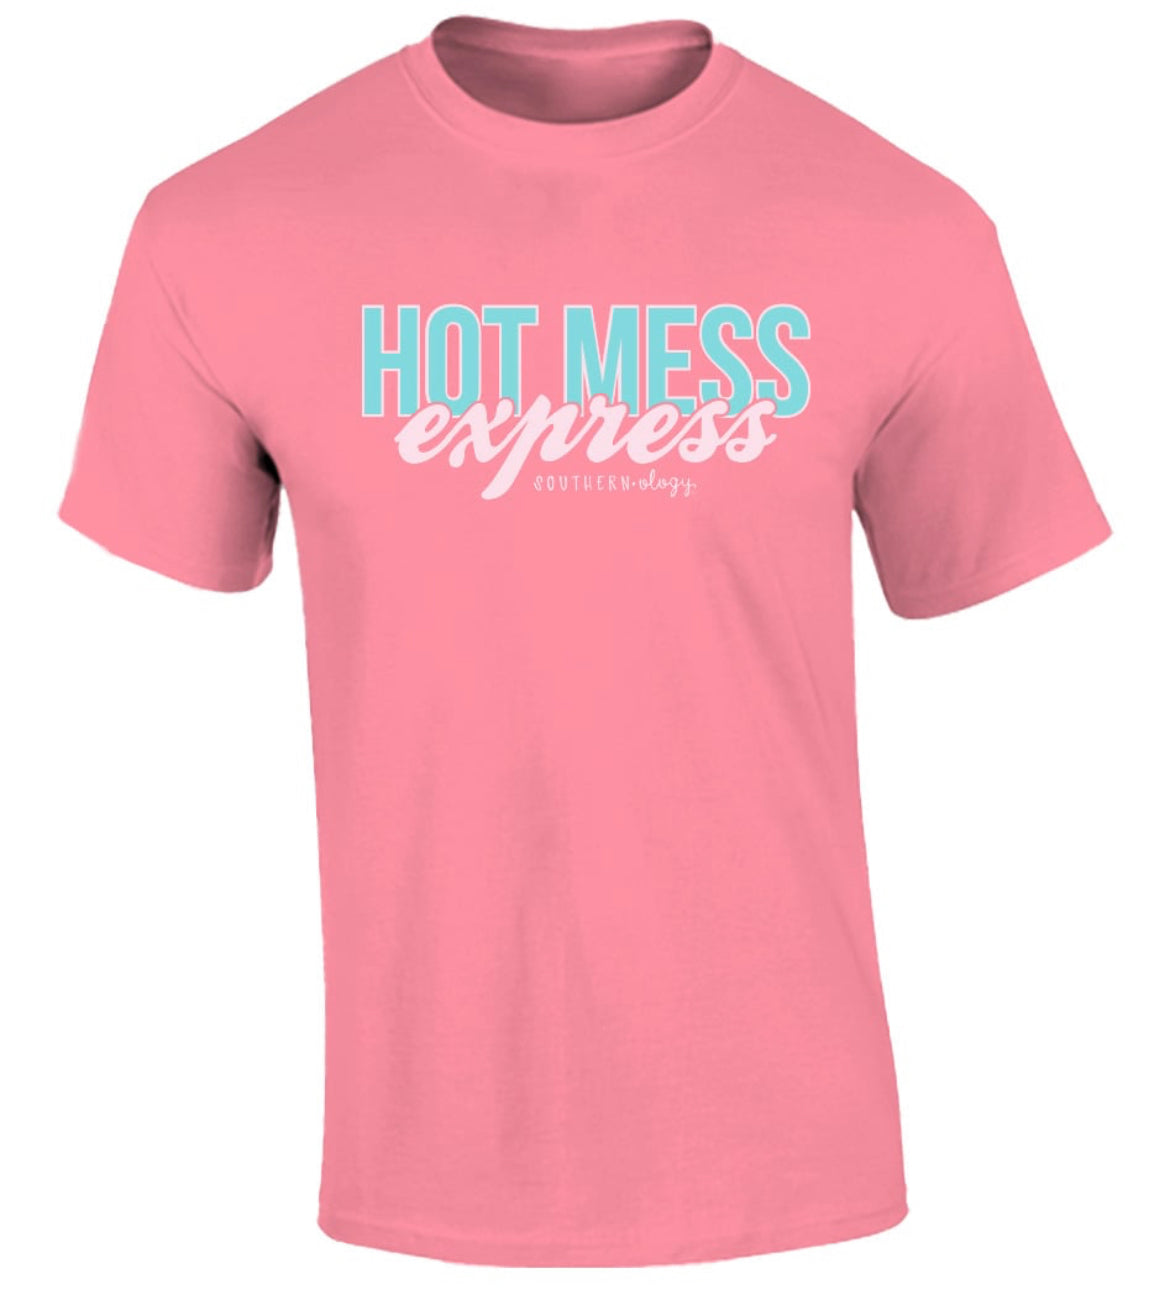 Southernology SS Hot Mess Express Statement Tshirt